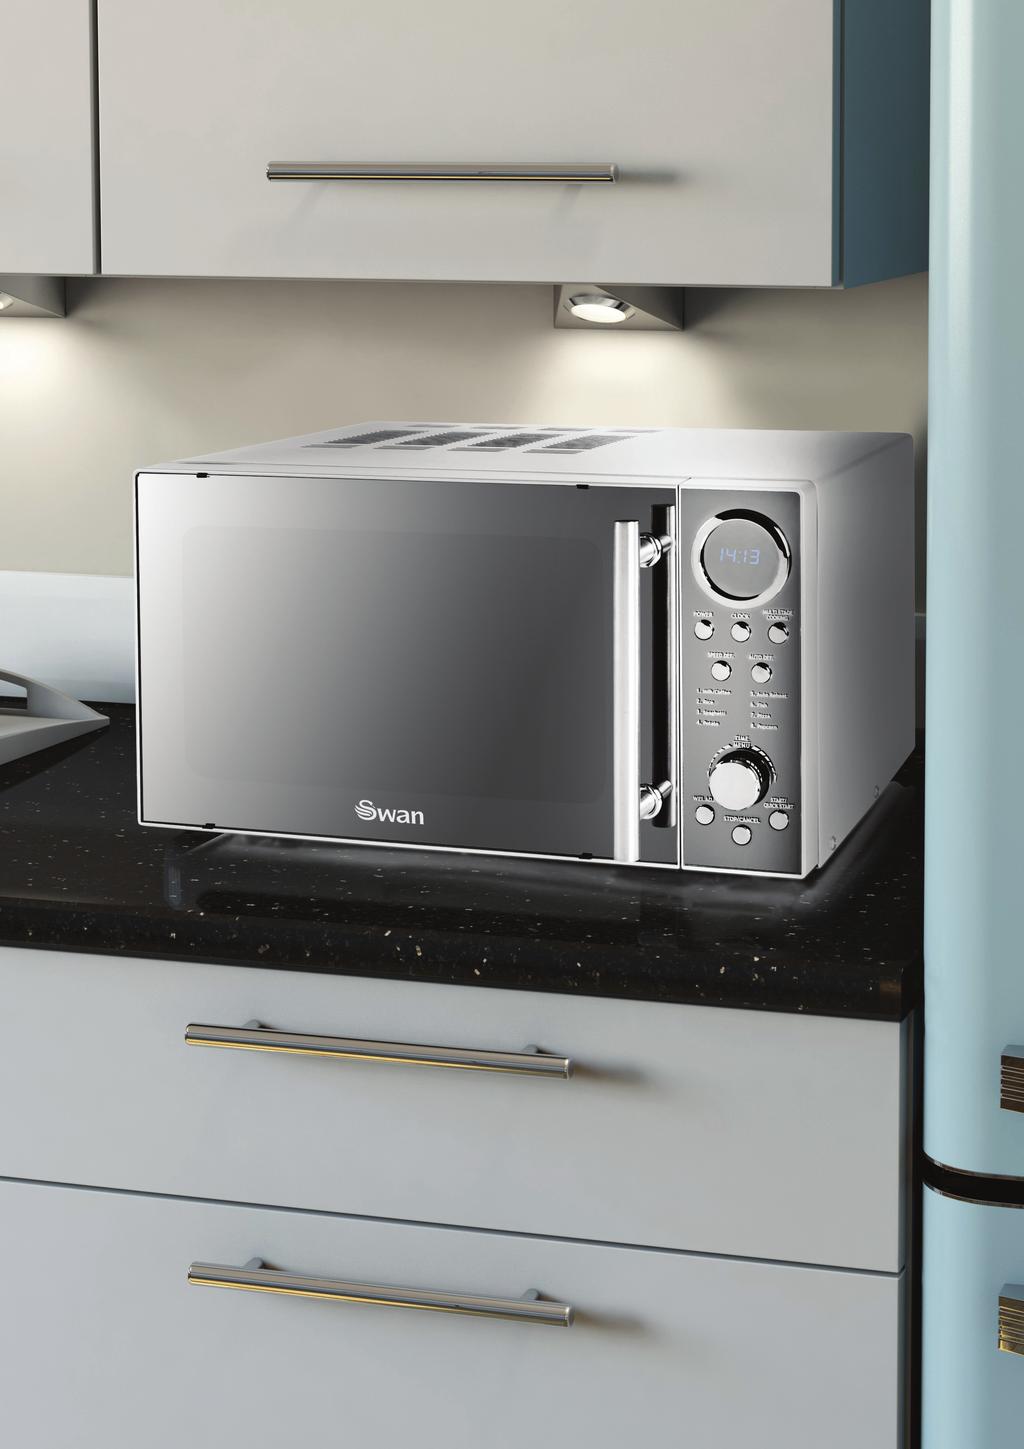 Microwave Oven User Guide For model: SM3080 (all colours)